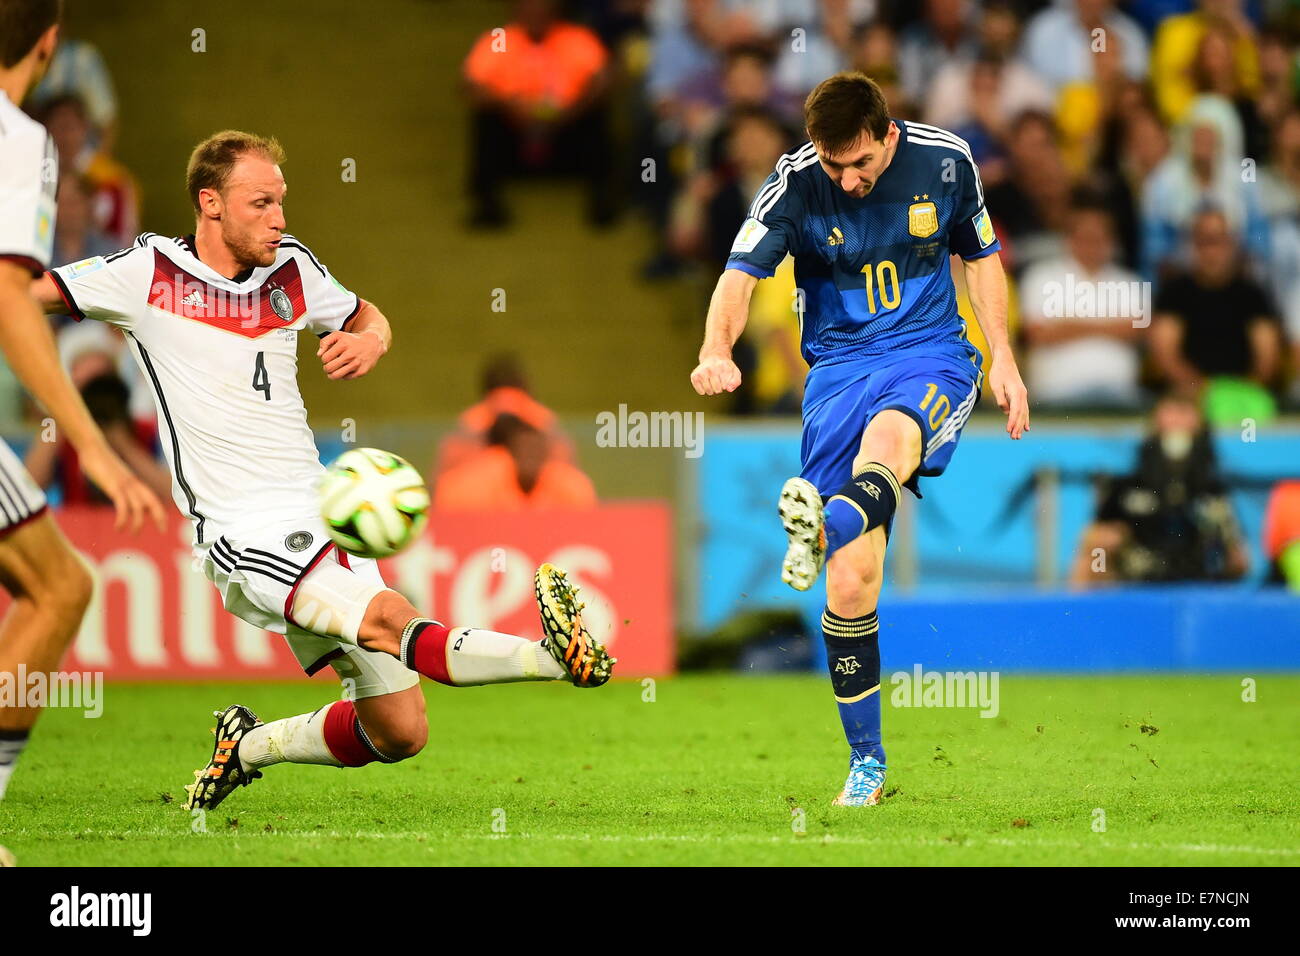 Benedikt HOEWEDES and Lionel Messi. Argentina v Germany. Final. FIFA World Cup 2014 Brazil. Maracana Stadium, Rio. 13 July 2014. Stock Photo